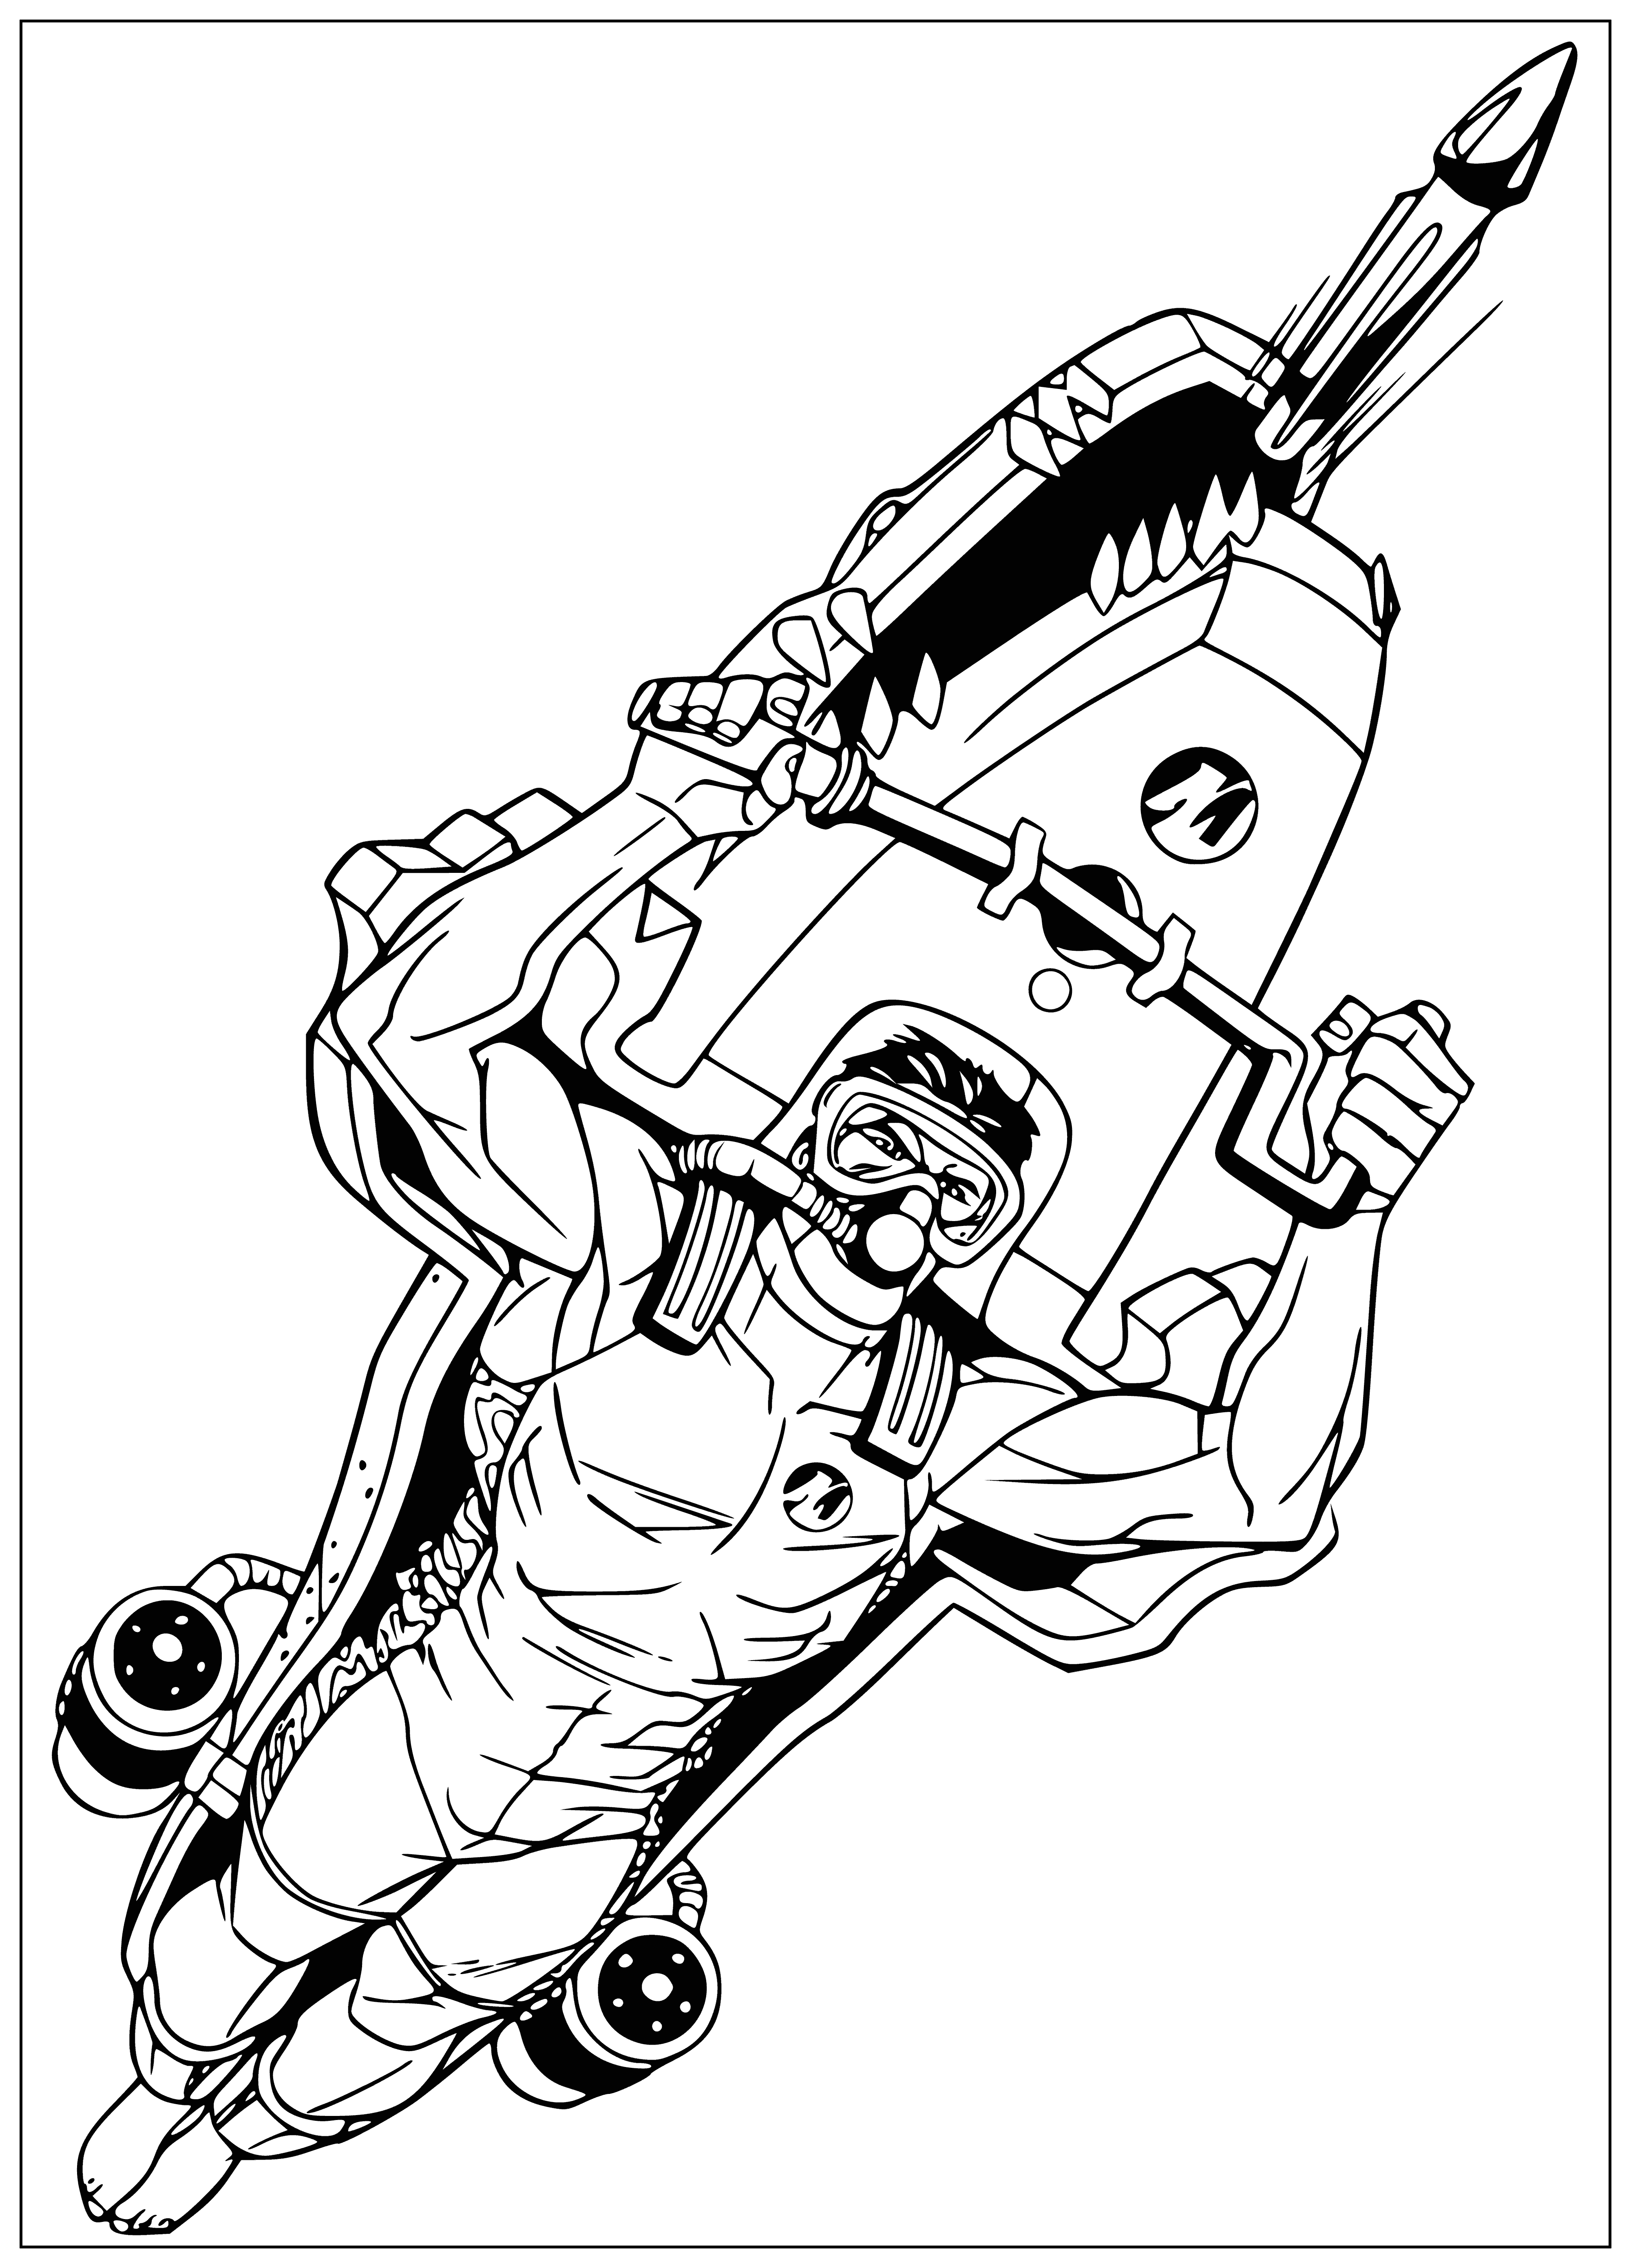 coloring page: He wears a wetsuit, flippers, diving mask, oxygen tank, and has a spear gun ready.